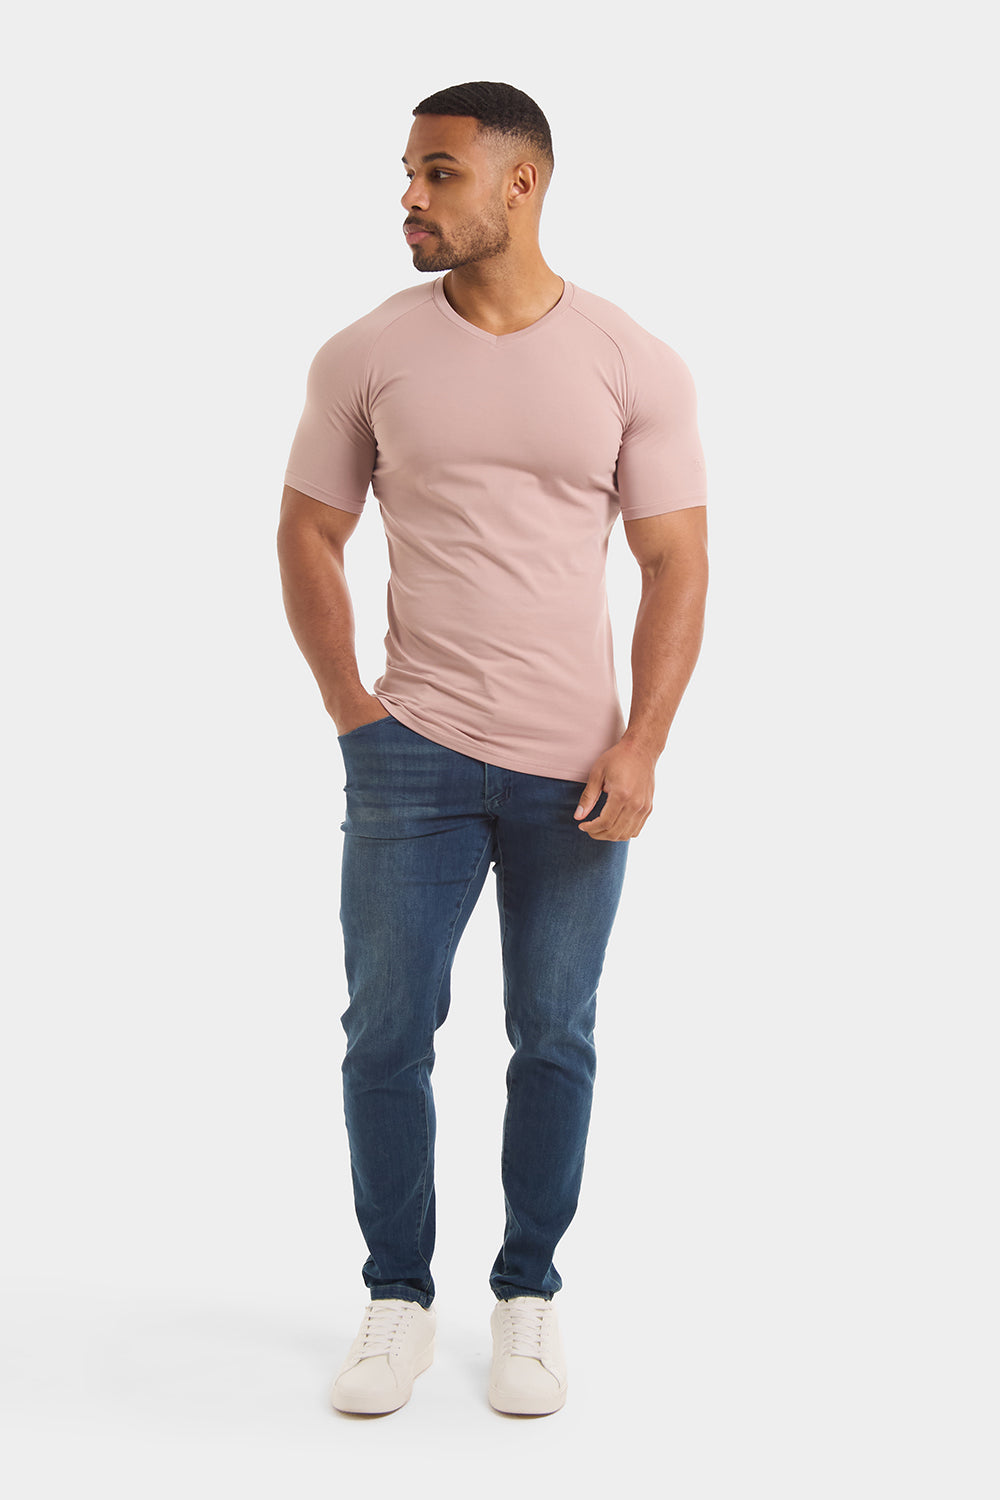 Muscle Fit V-Neck in Blush - TAILORED ATHLETE - ROW